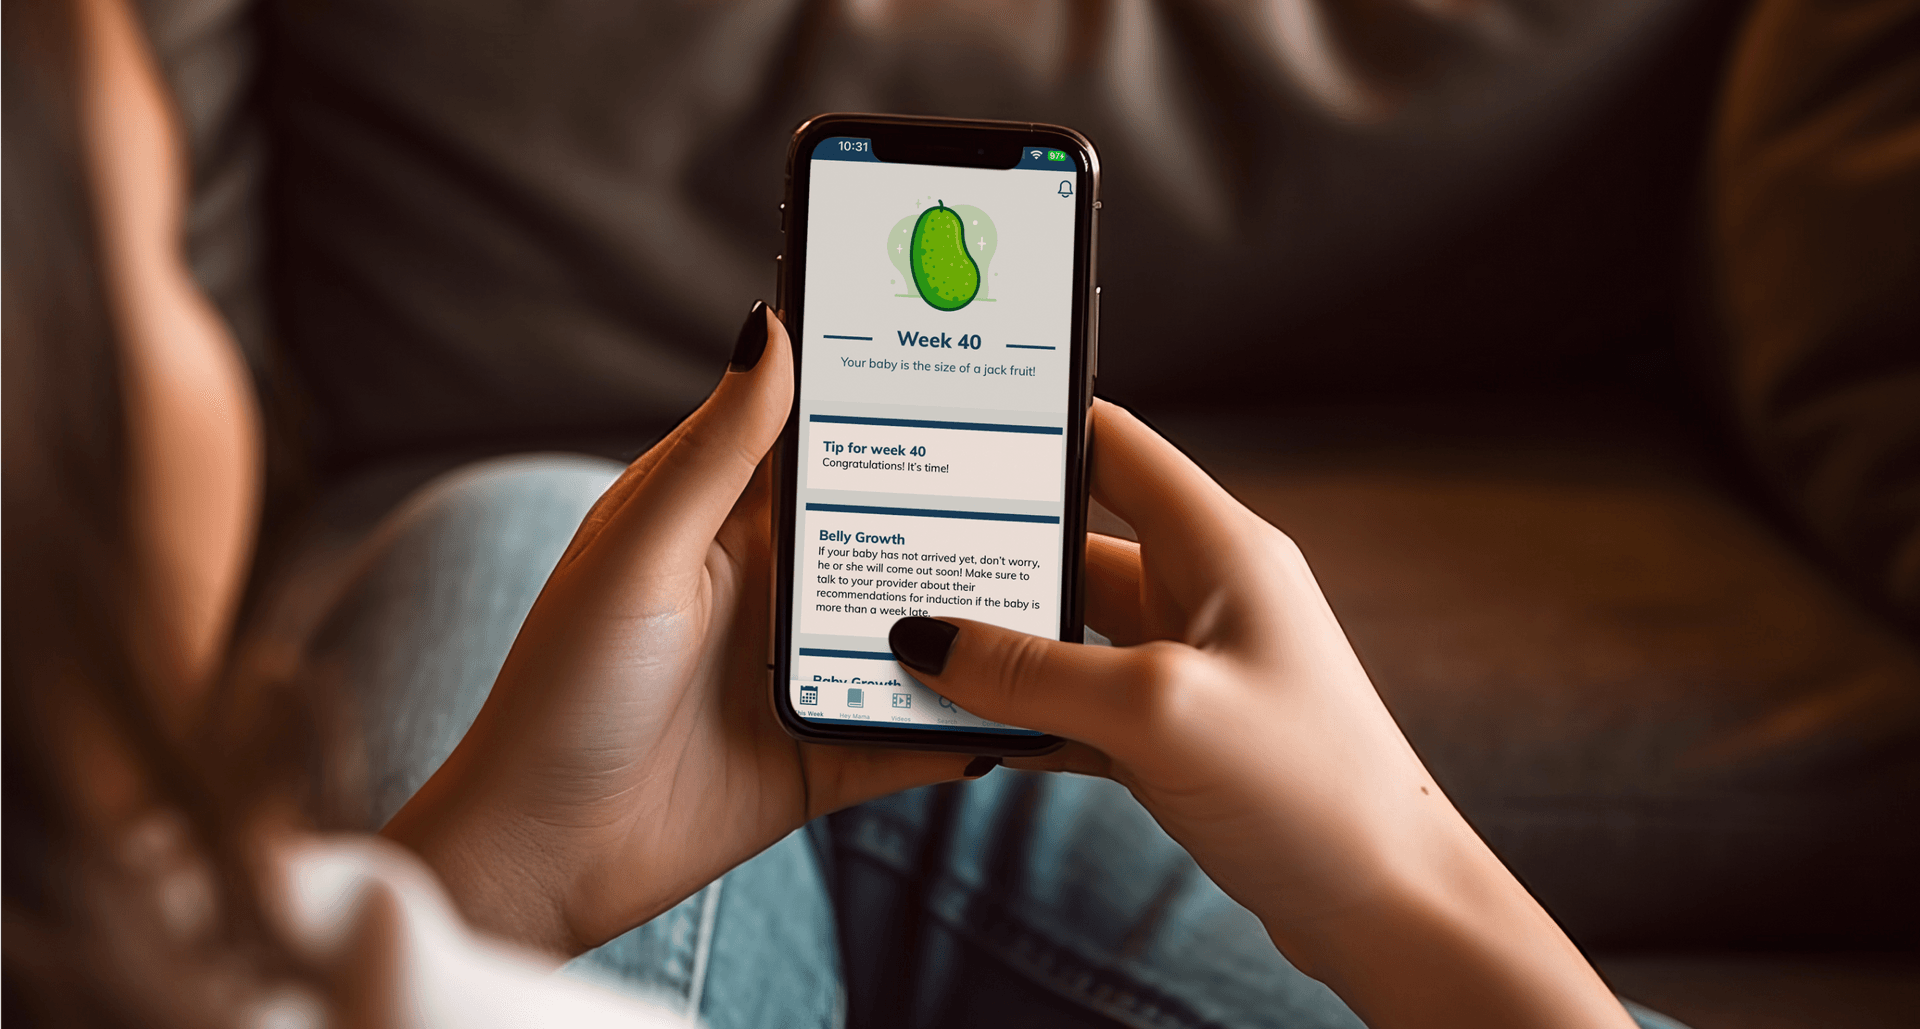 The "Hey Mama" app running on a phone. The user sees info related to week 40 of pregnancy including info on the size of the fetus and tips for the expectant parent.